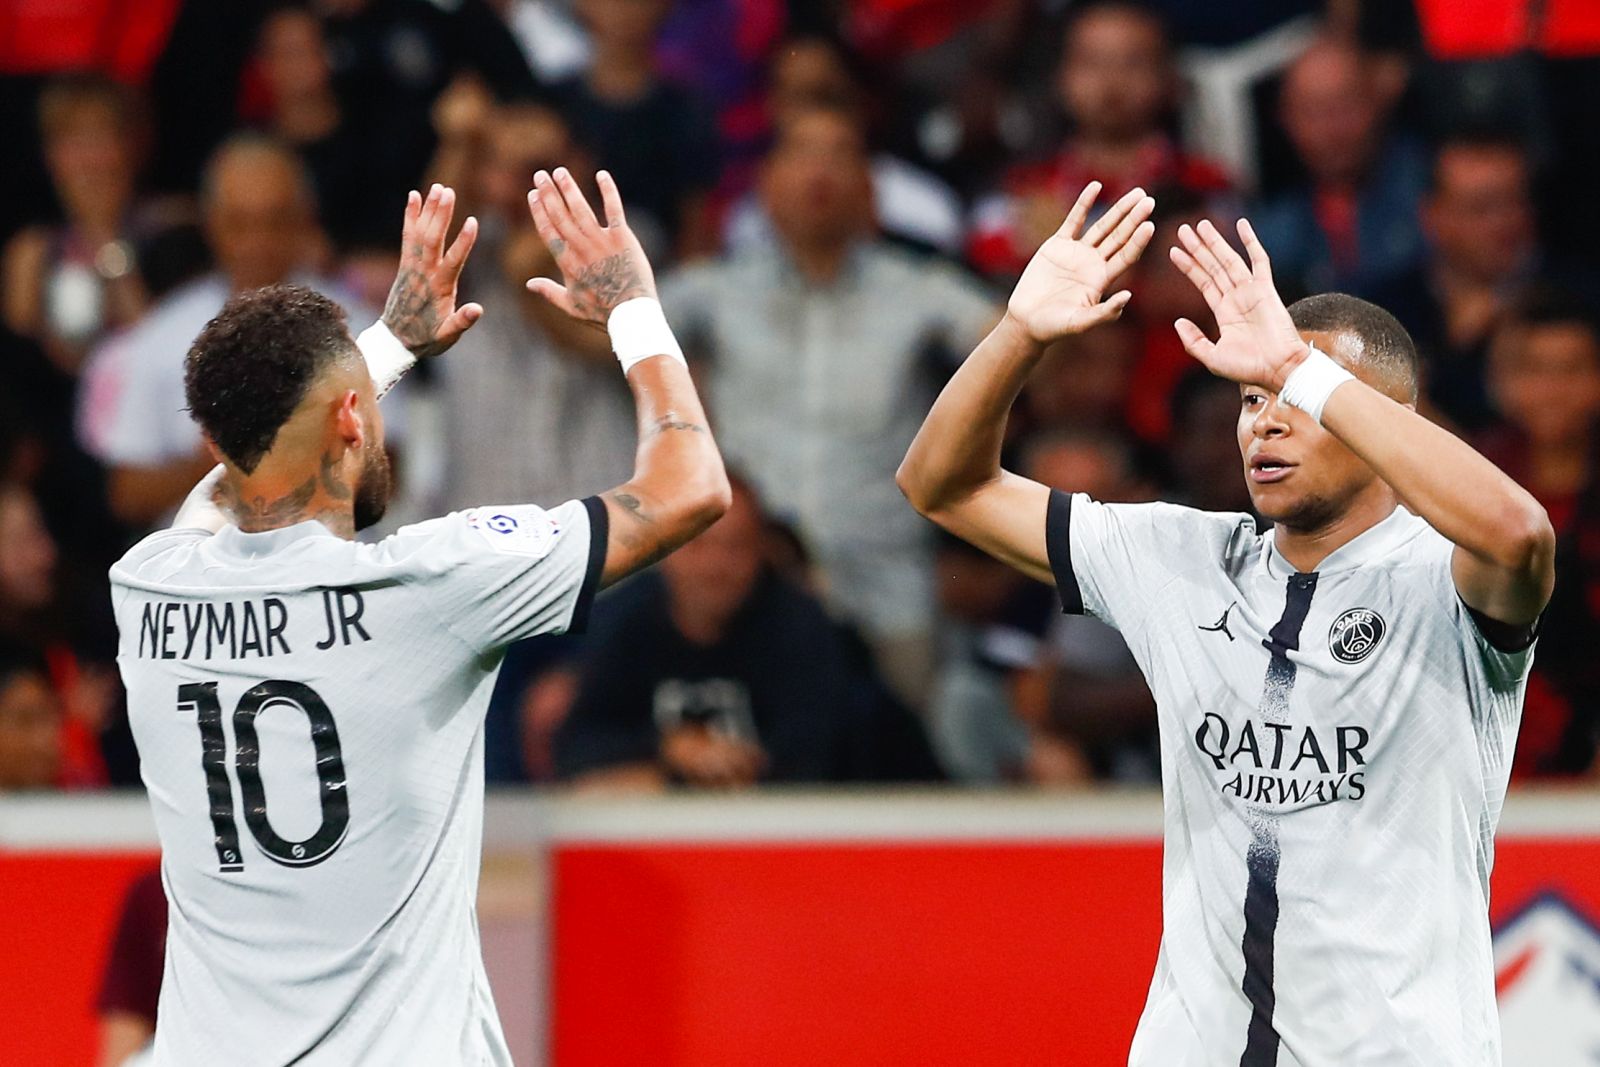 epa10132929 Paris Saint Germain's Kylian Mbappe and Paris Saint Germain's Neymar Jr (L)  celebrate after scoring the 7-1 goal during the French Ligue 1 soccer match between Lille and PSG in Lille, France, 21 August 2022.  EPA/Mohammed Badra